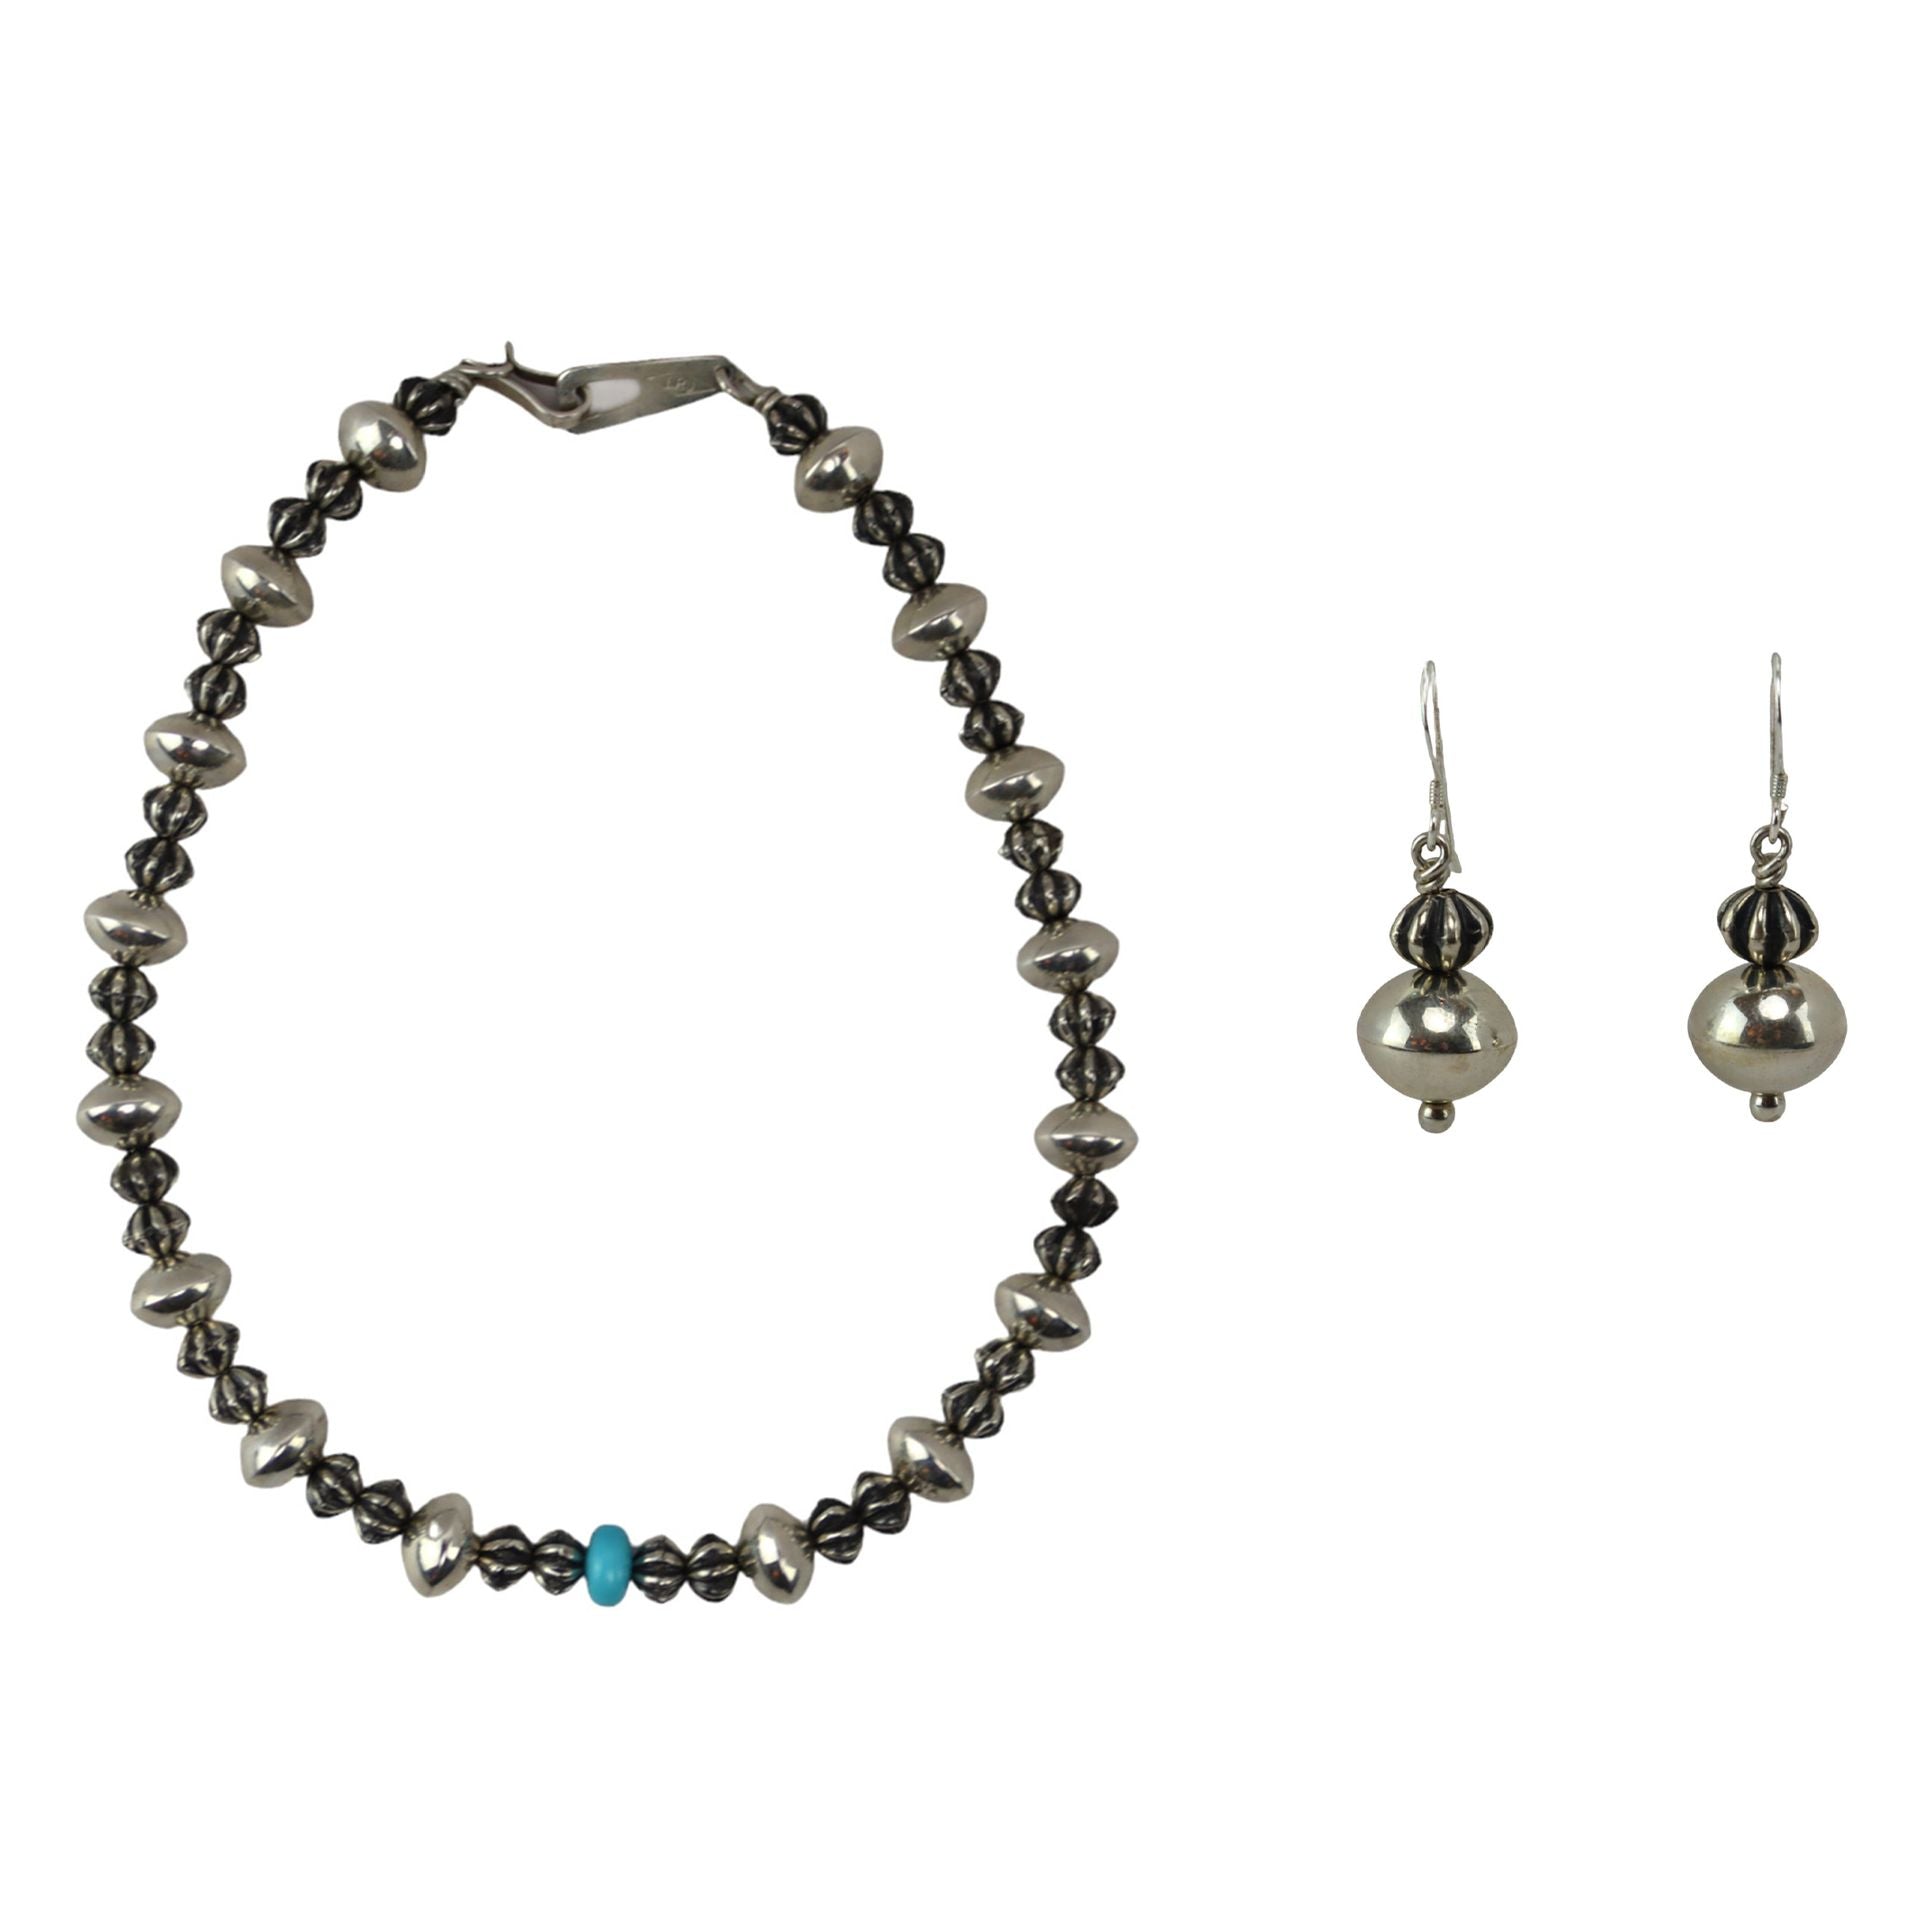 Navajo - Turquoise and Silver Beaded Necklace and Earrings Set c. 2000s (J16064-046)